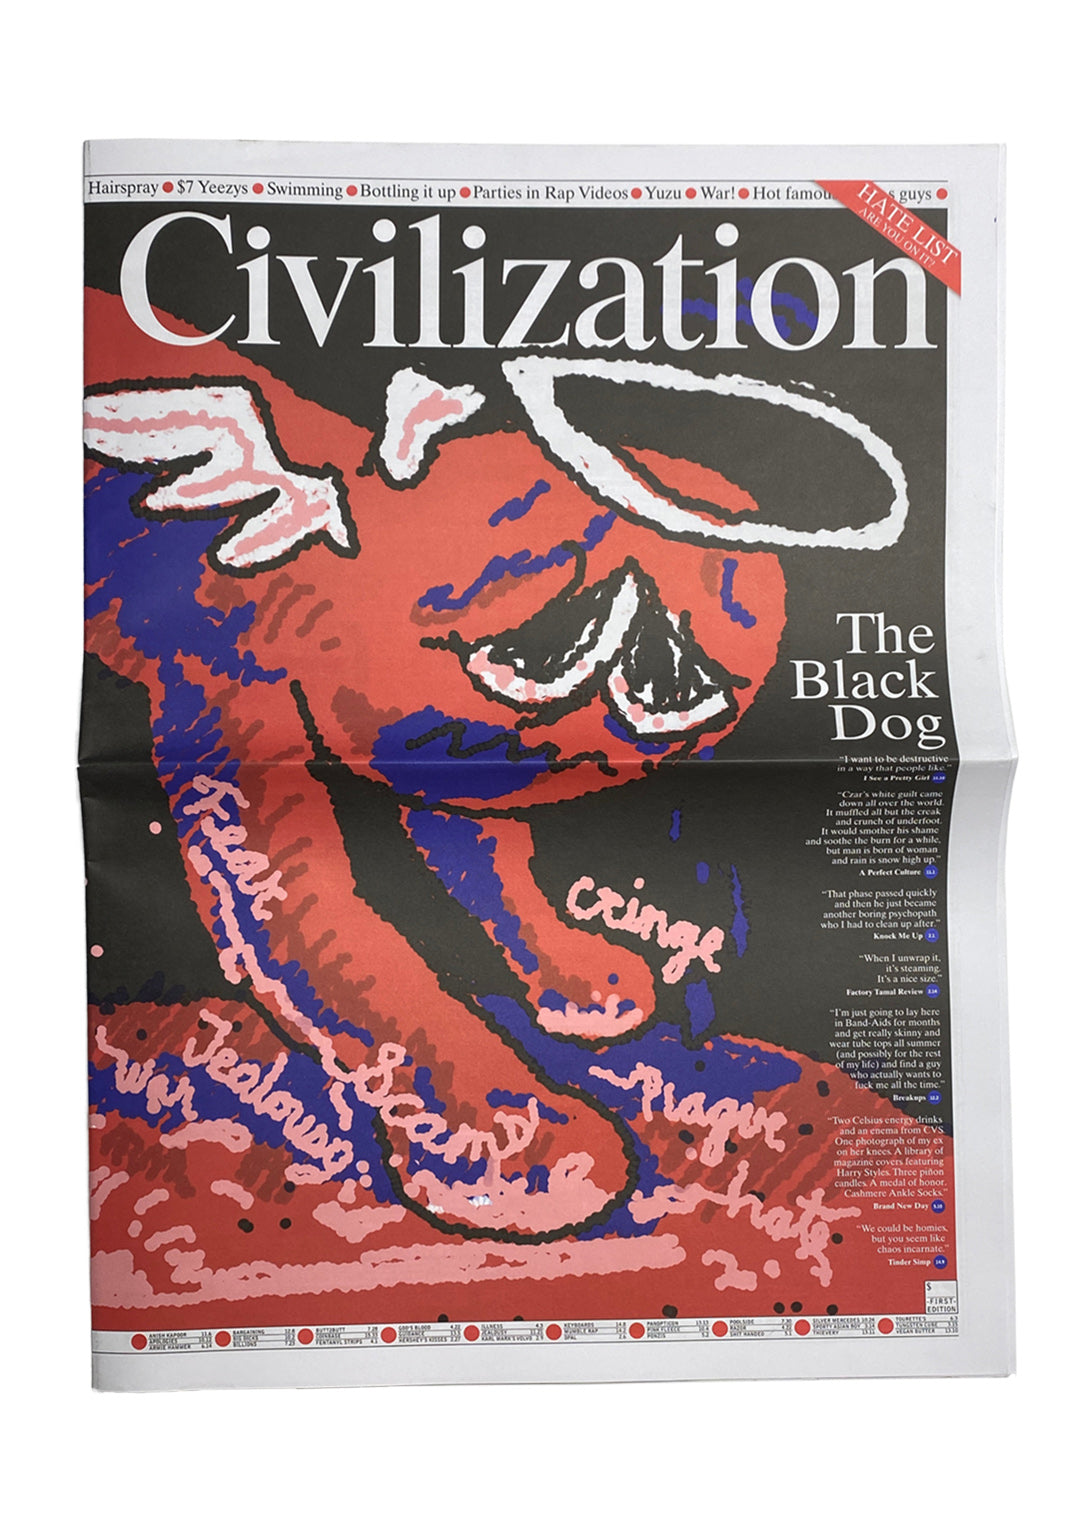 CIVILIZATION ISSUE #6: THE BLACK DOG (Out of Print, Rare)